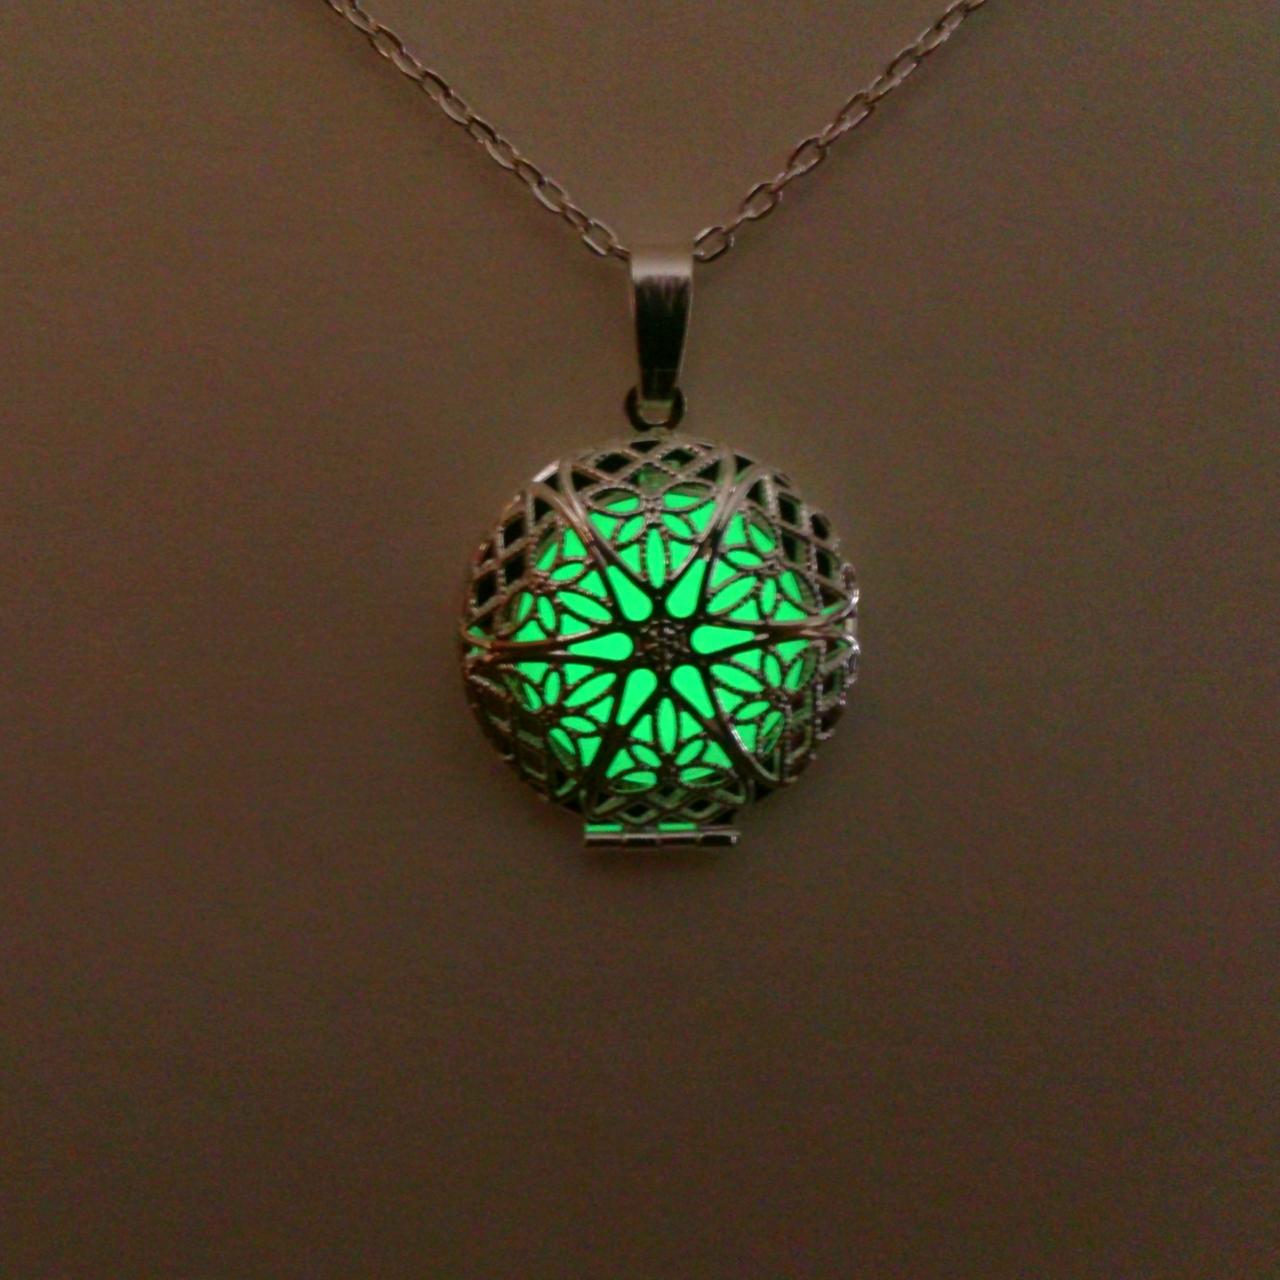 Green Glow In The Dark Necklace - Glowing Pendant - Glow Jewelry - Glowing Necklace - Anniversary Gift - Christmas Gift - Gifts For Her